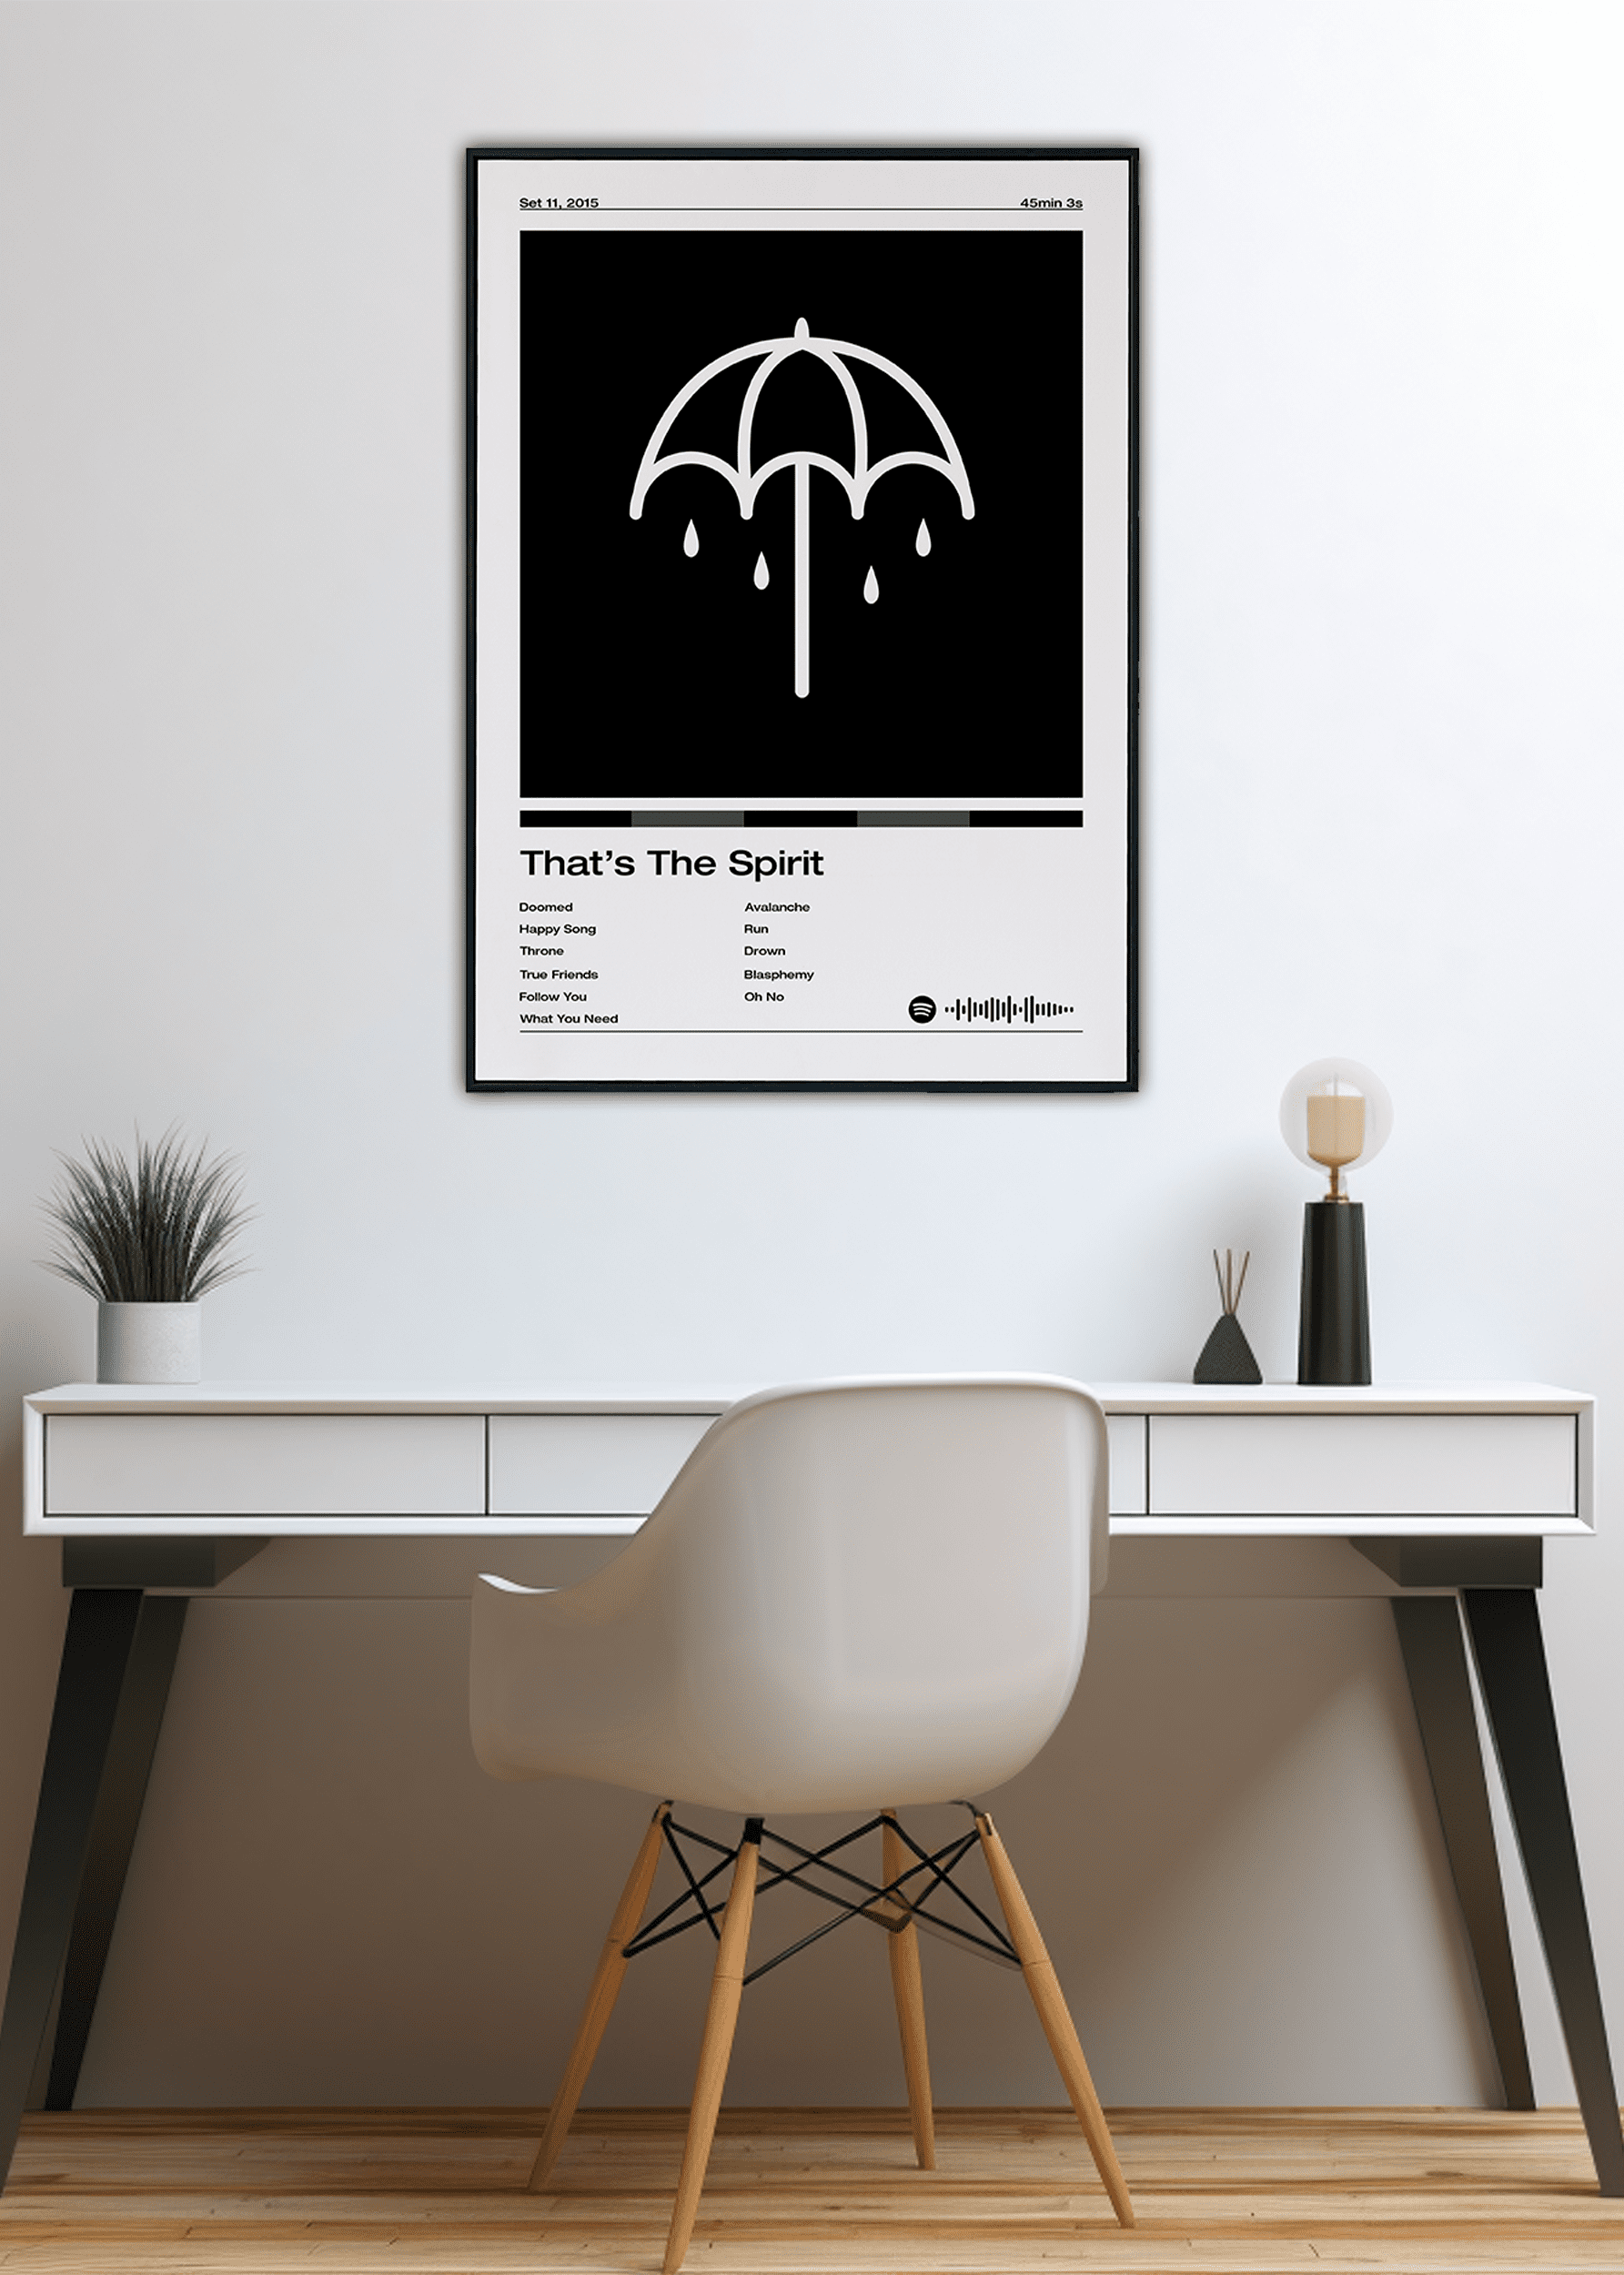 Bring Me The Horizon Poster Print, That's The Spirit Poster, Music Poster  sold by Chelsea Johnson, SKU 41454895